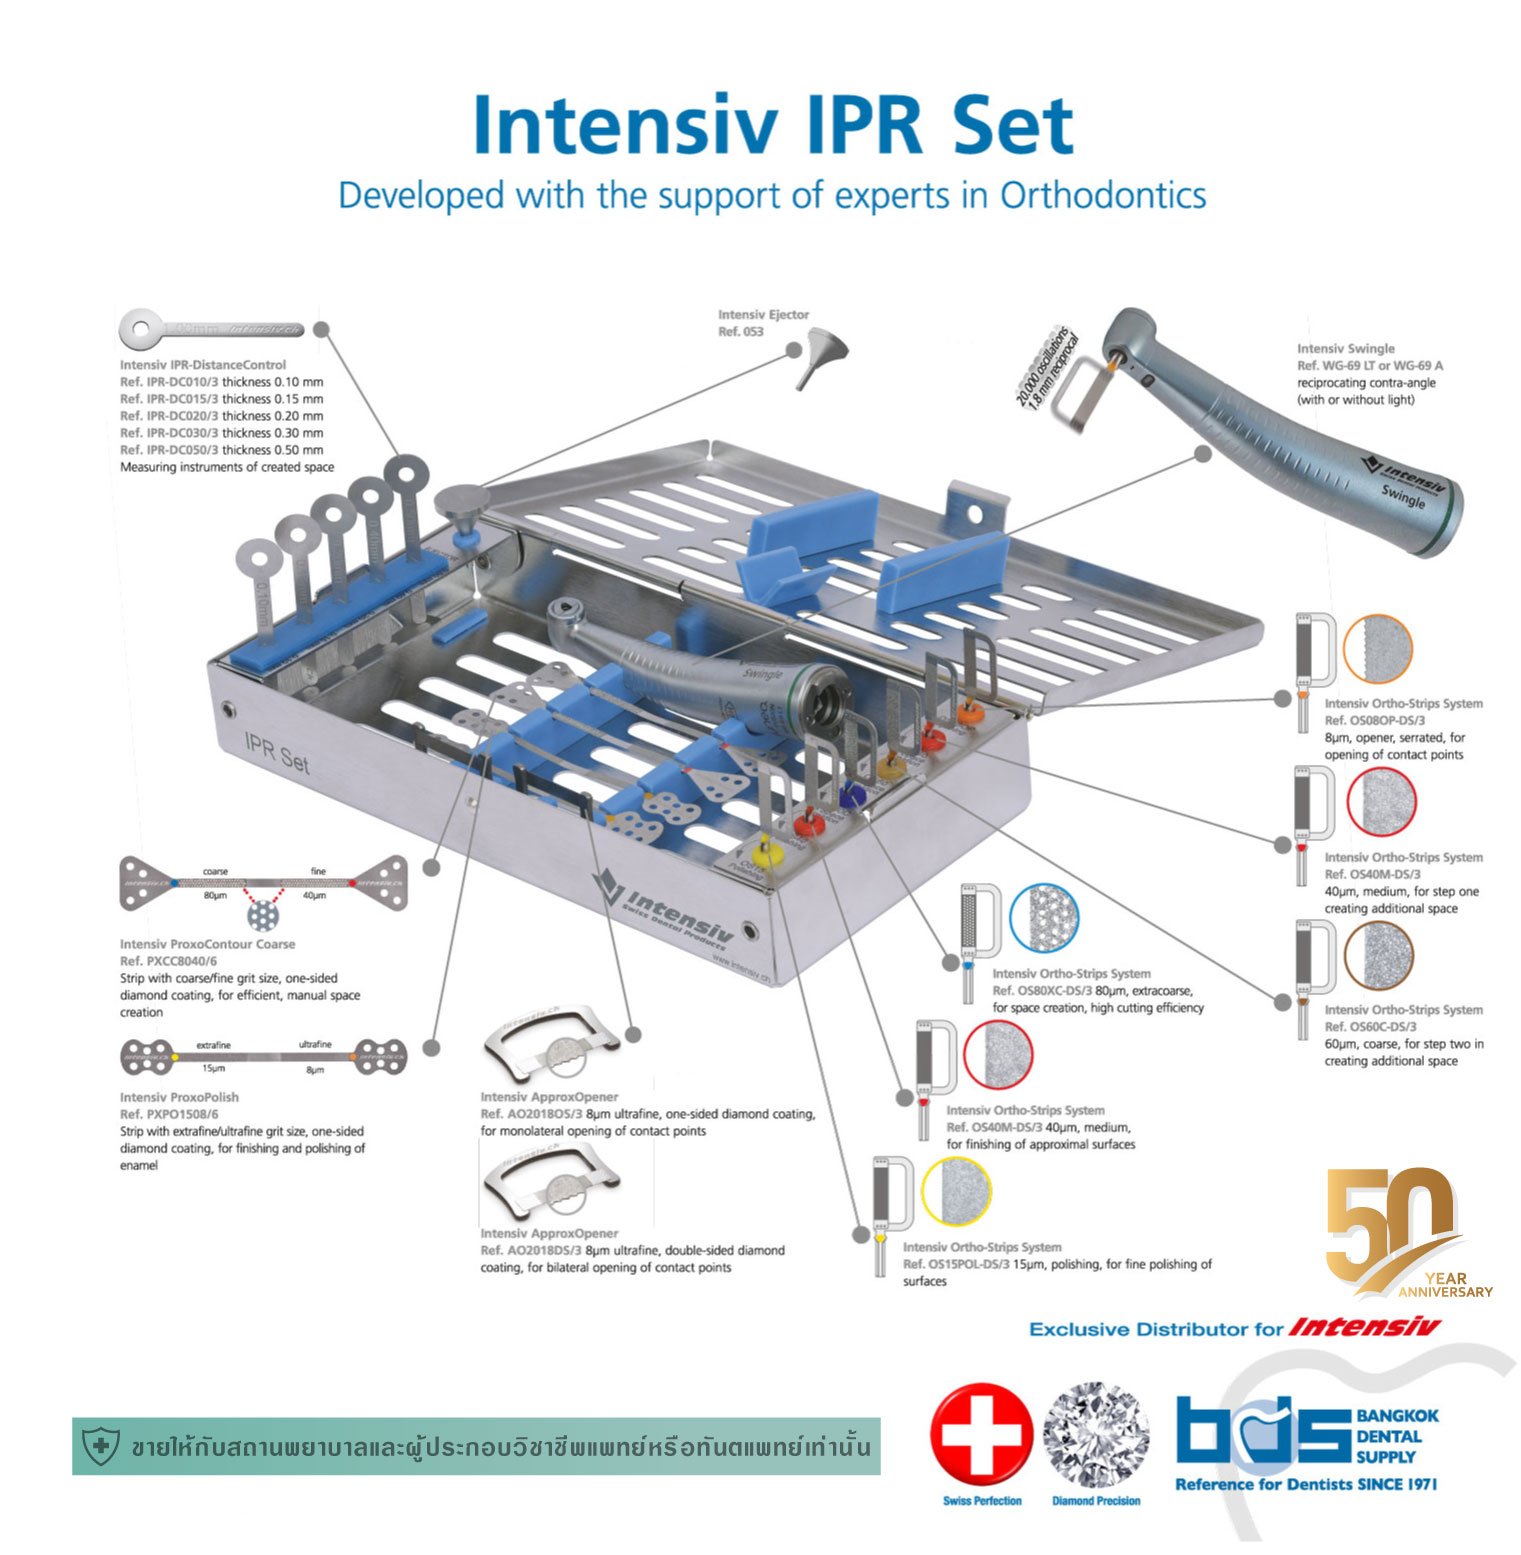 Intensiv IPR Set (developed from the support of experts in Orthodontics)